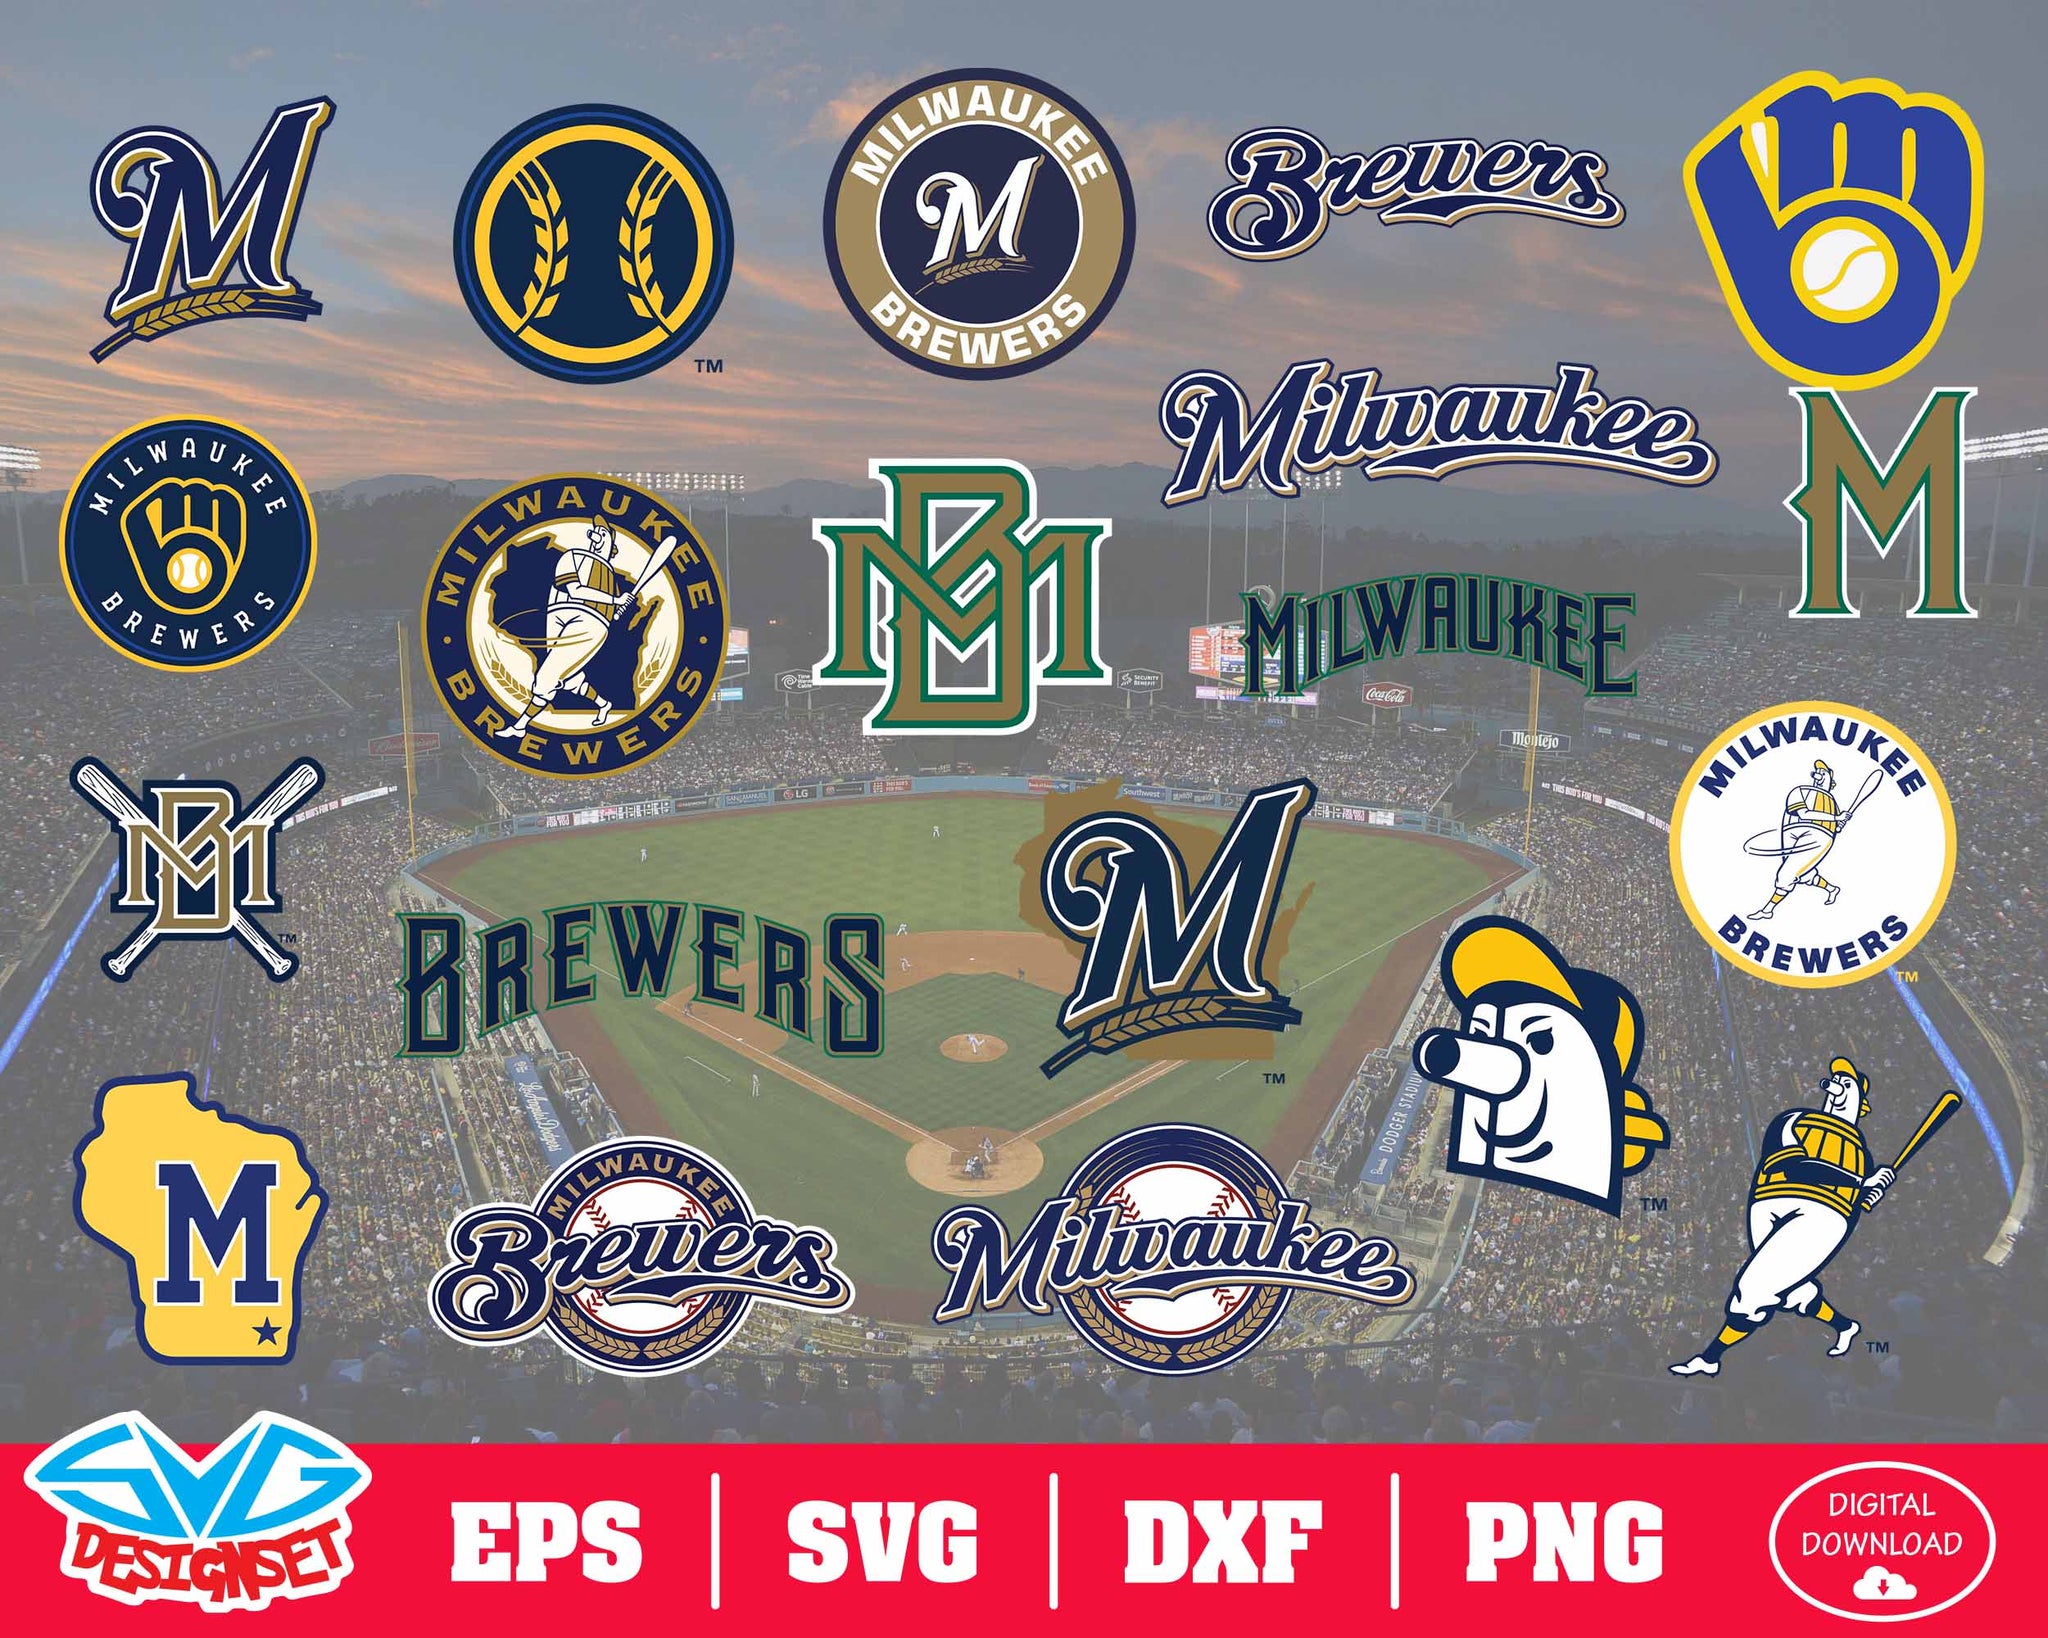 Milwaukee Brewers Team Svg, Dxf, Eps, Png, Clipart, Silhouette and Cutfiles - SVGDesignSets